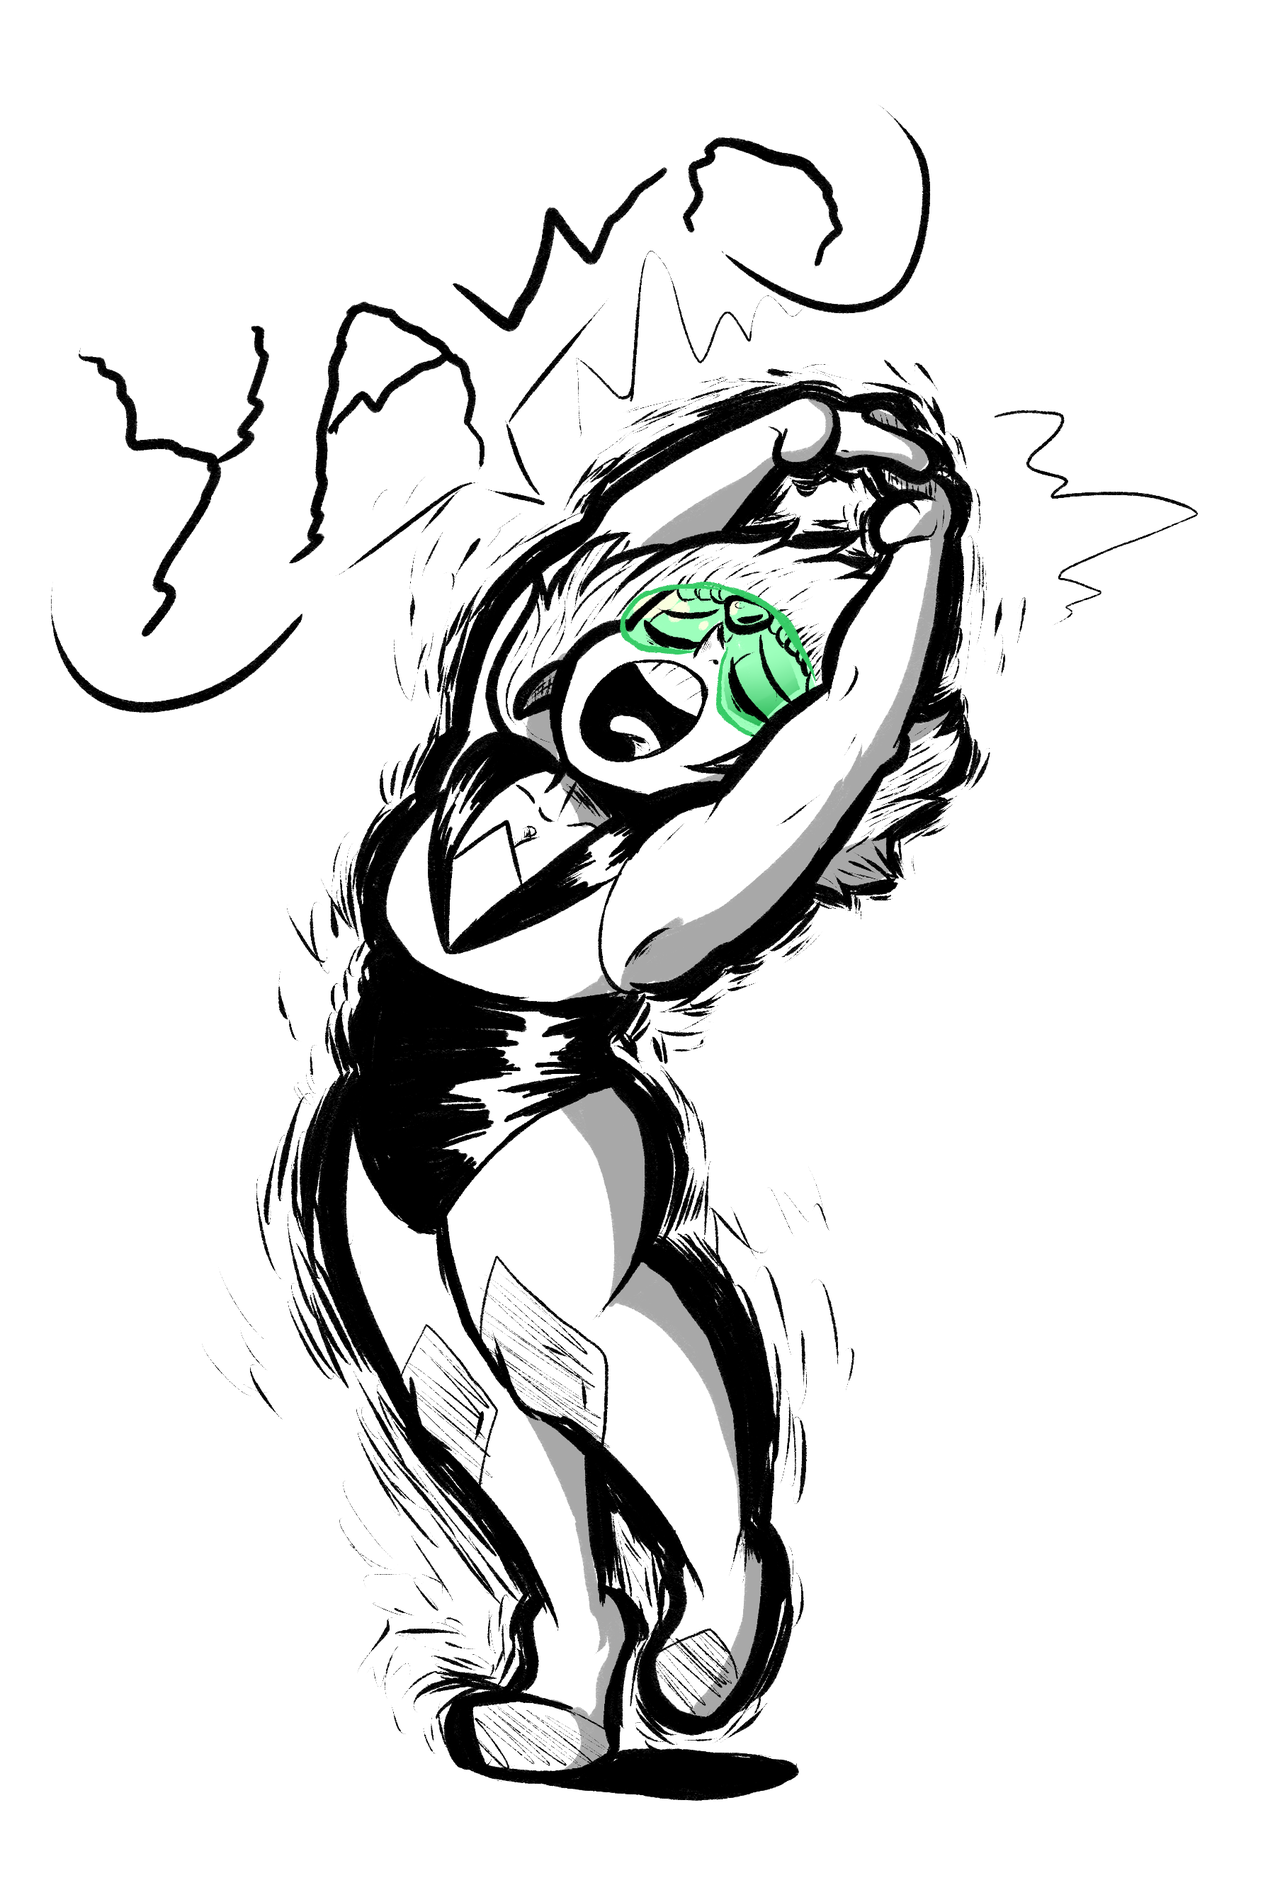 heres a warm up peridot sketch. shes stretching and ready to face the day